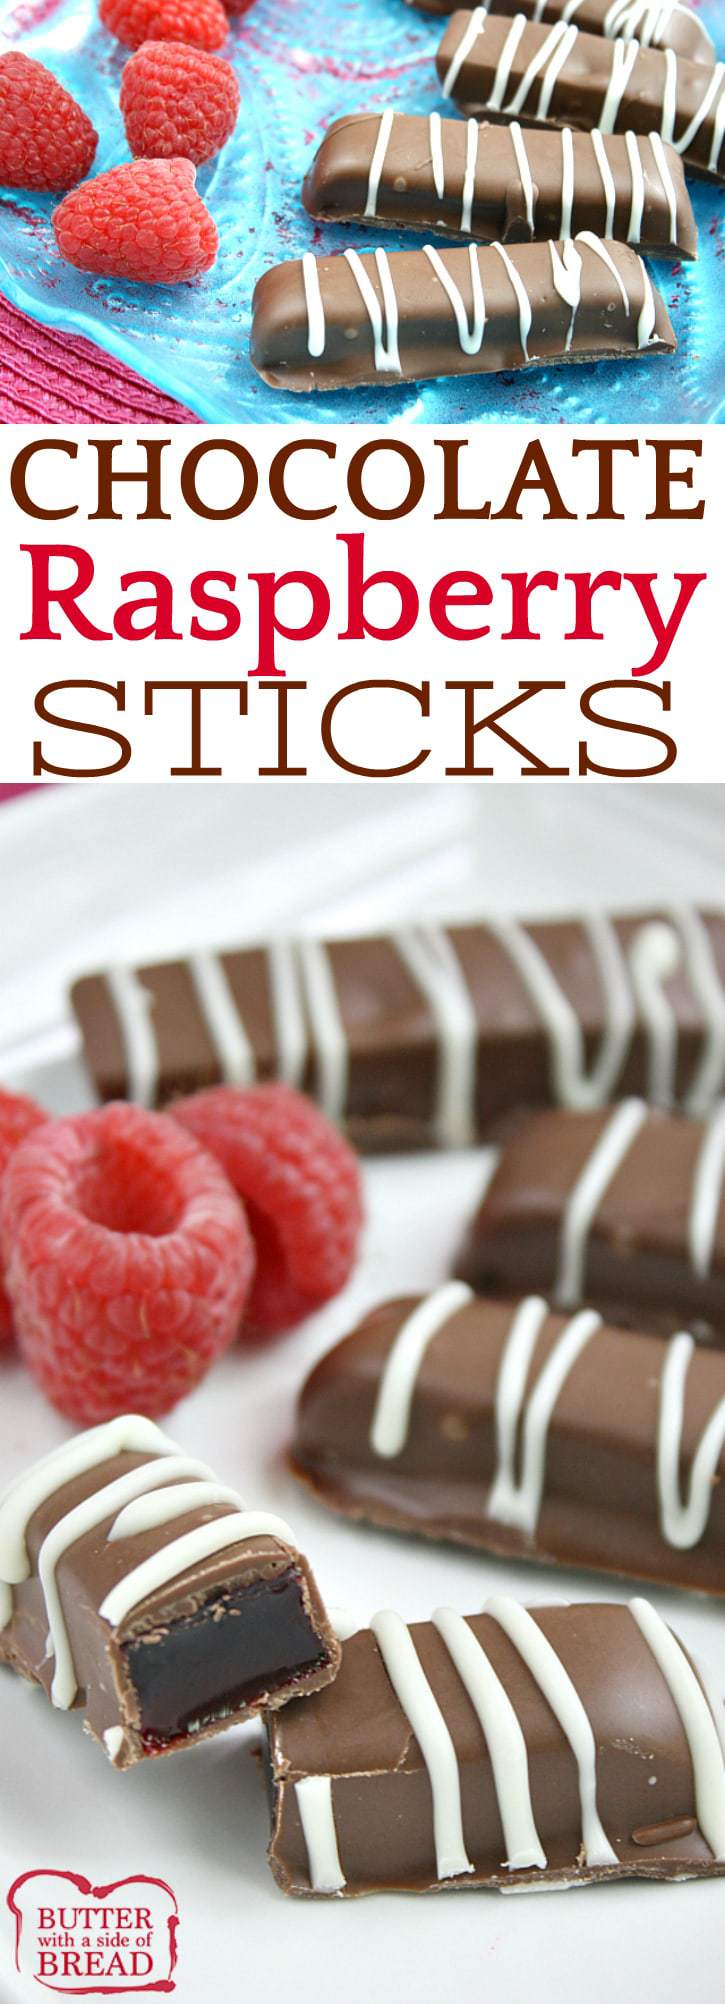 Chocolate Raspberry Sticks are a delicious jellied raspberry filling dipped in melted chocolate!